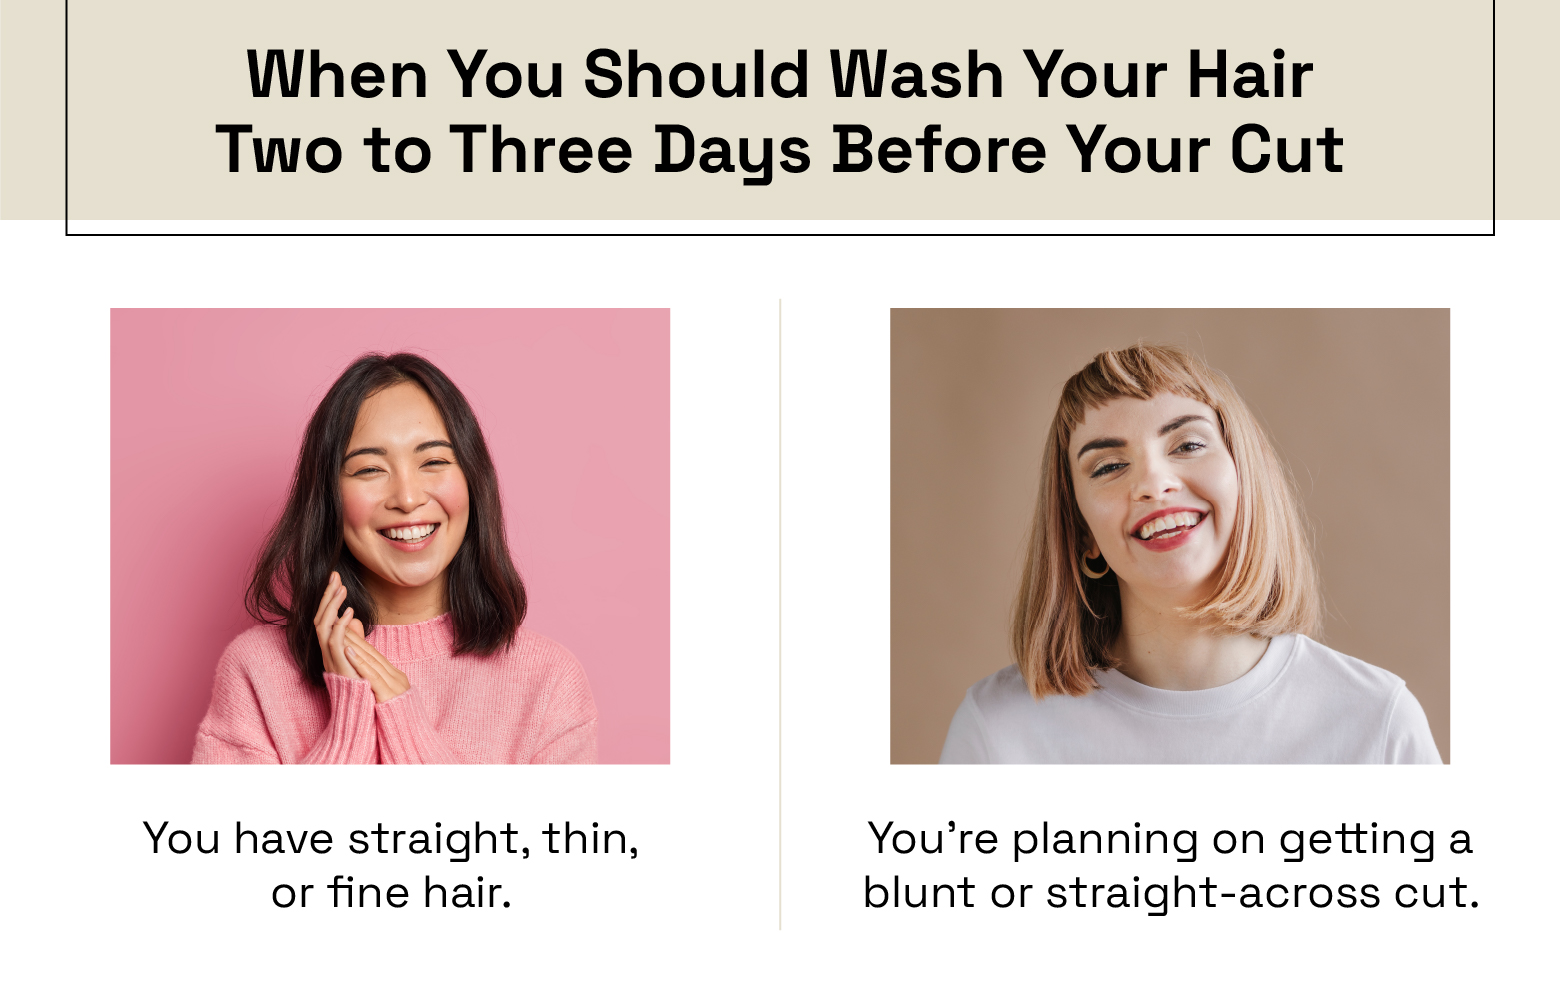 when you should wash your hair two to three days before a cut